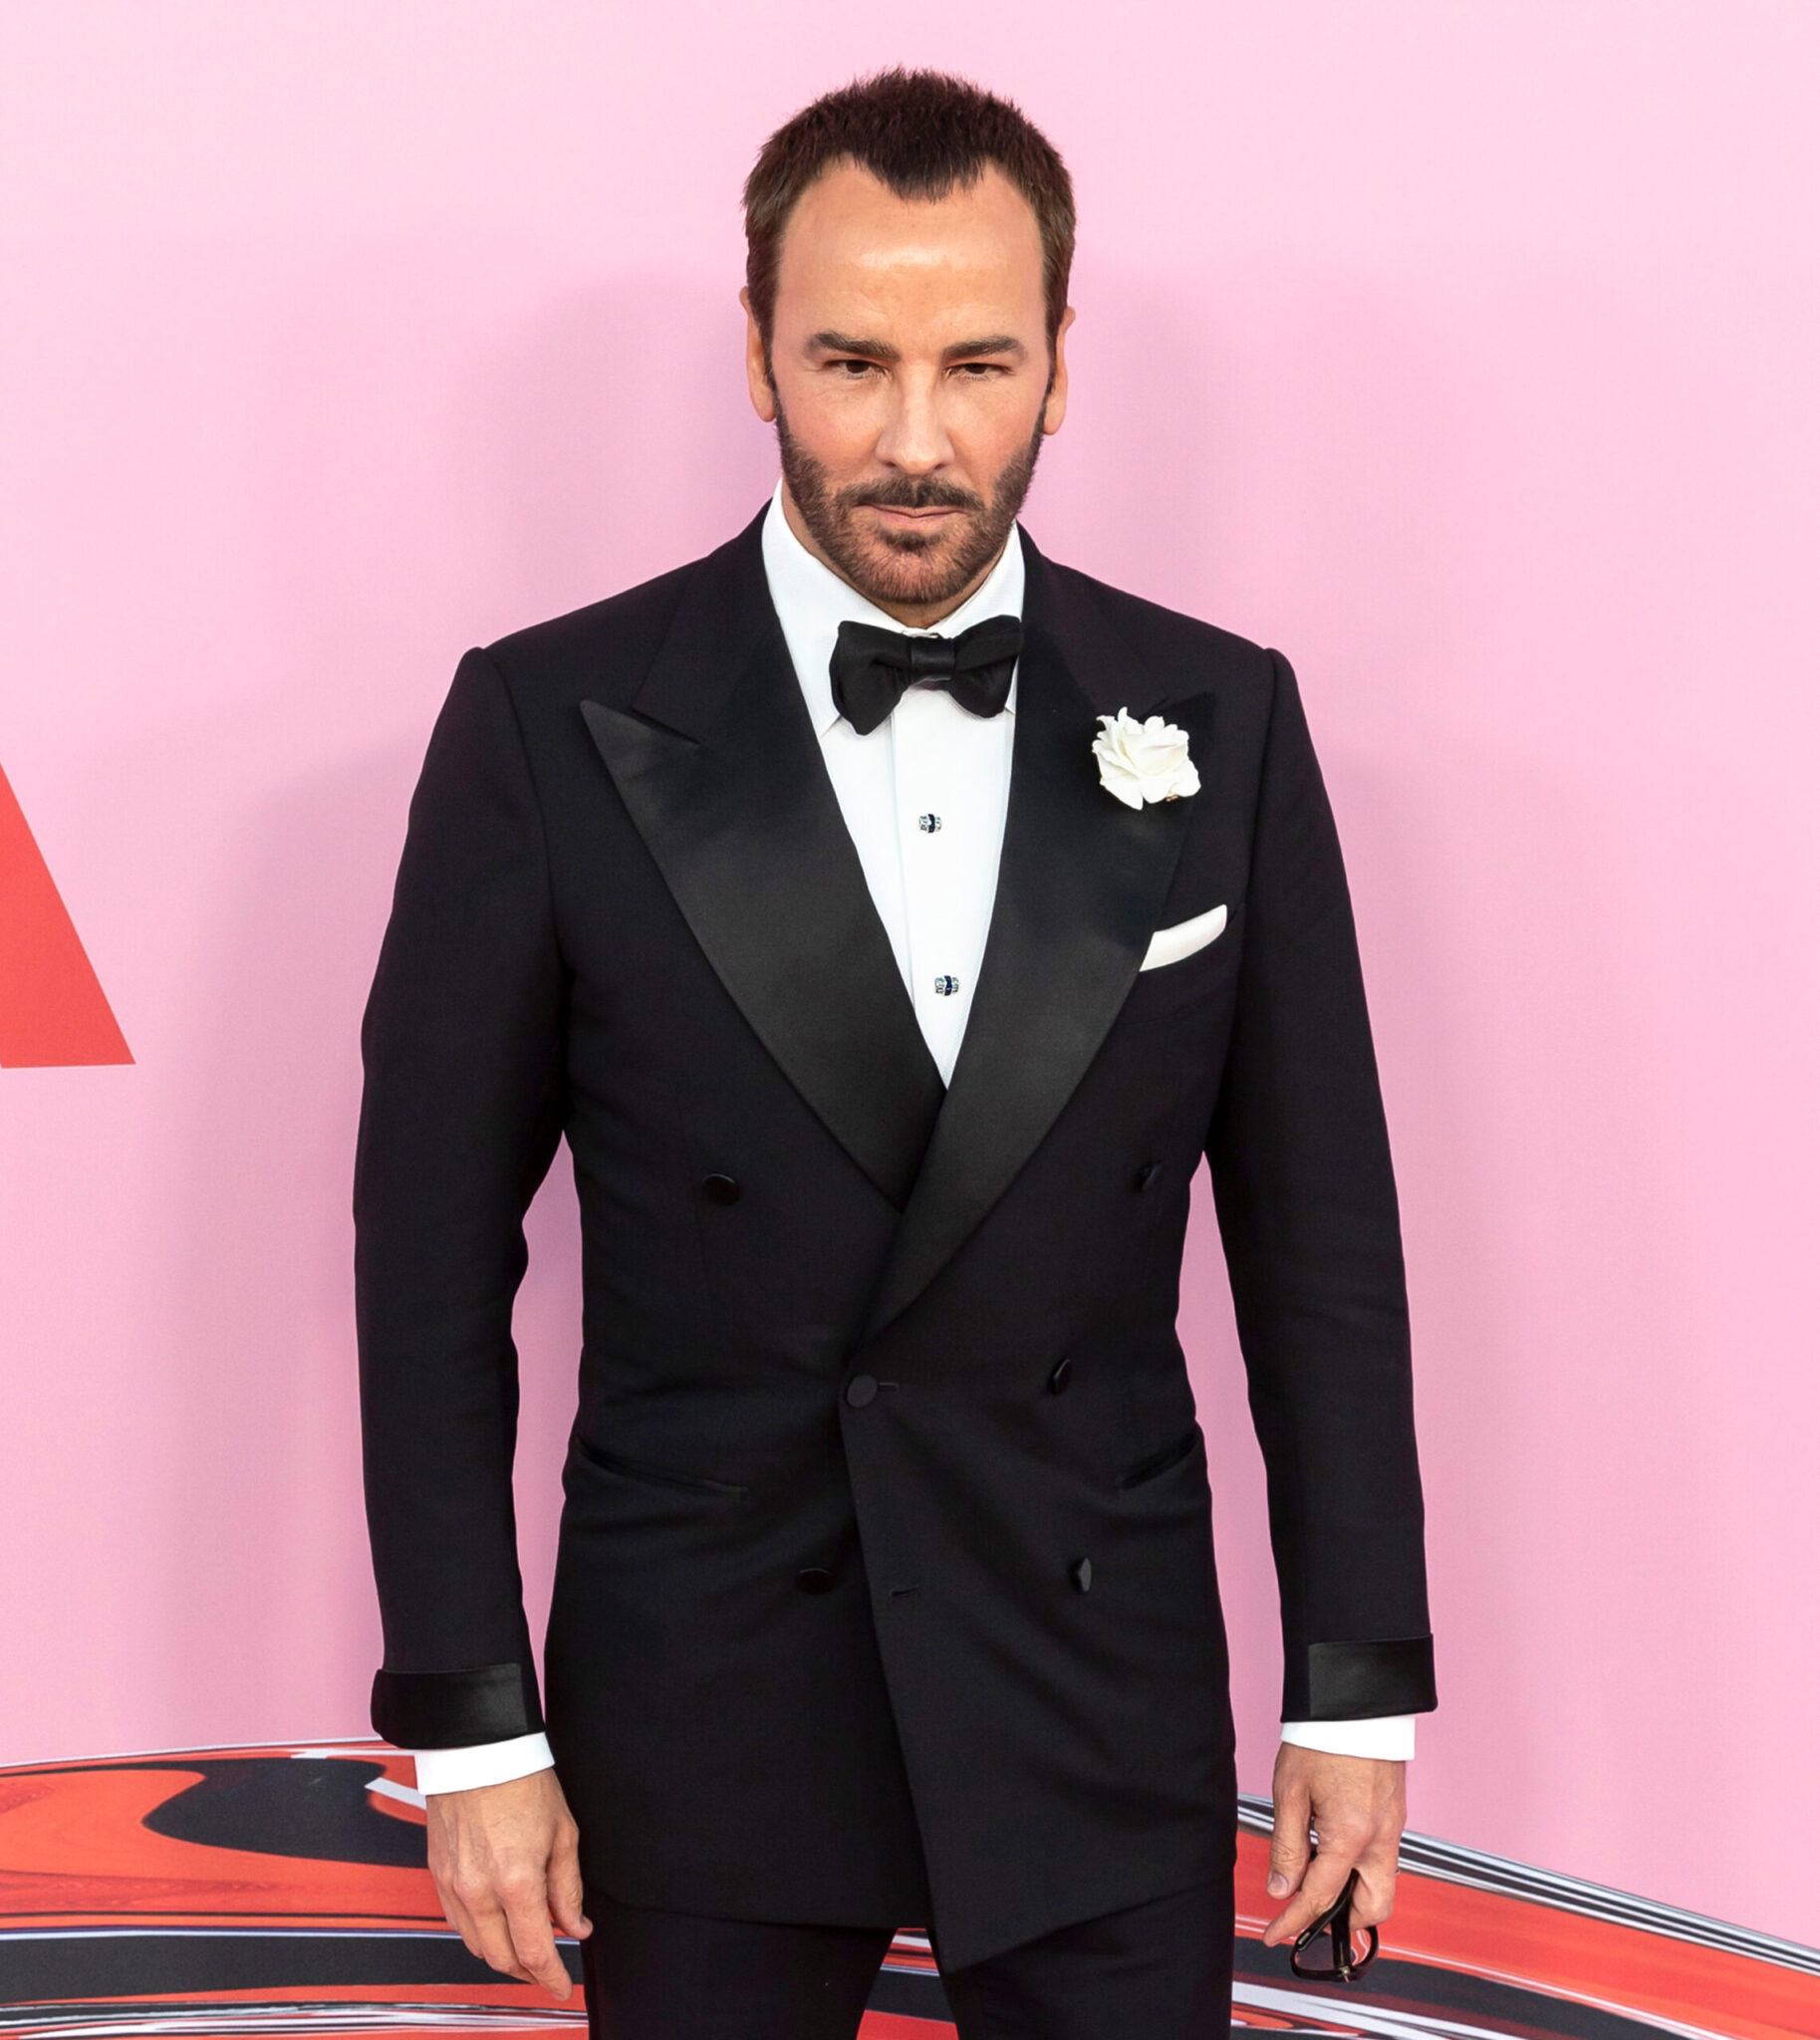 Is Tom Ford Saying Farewell to Fashion? - The New York Times